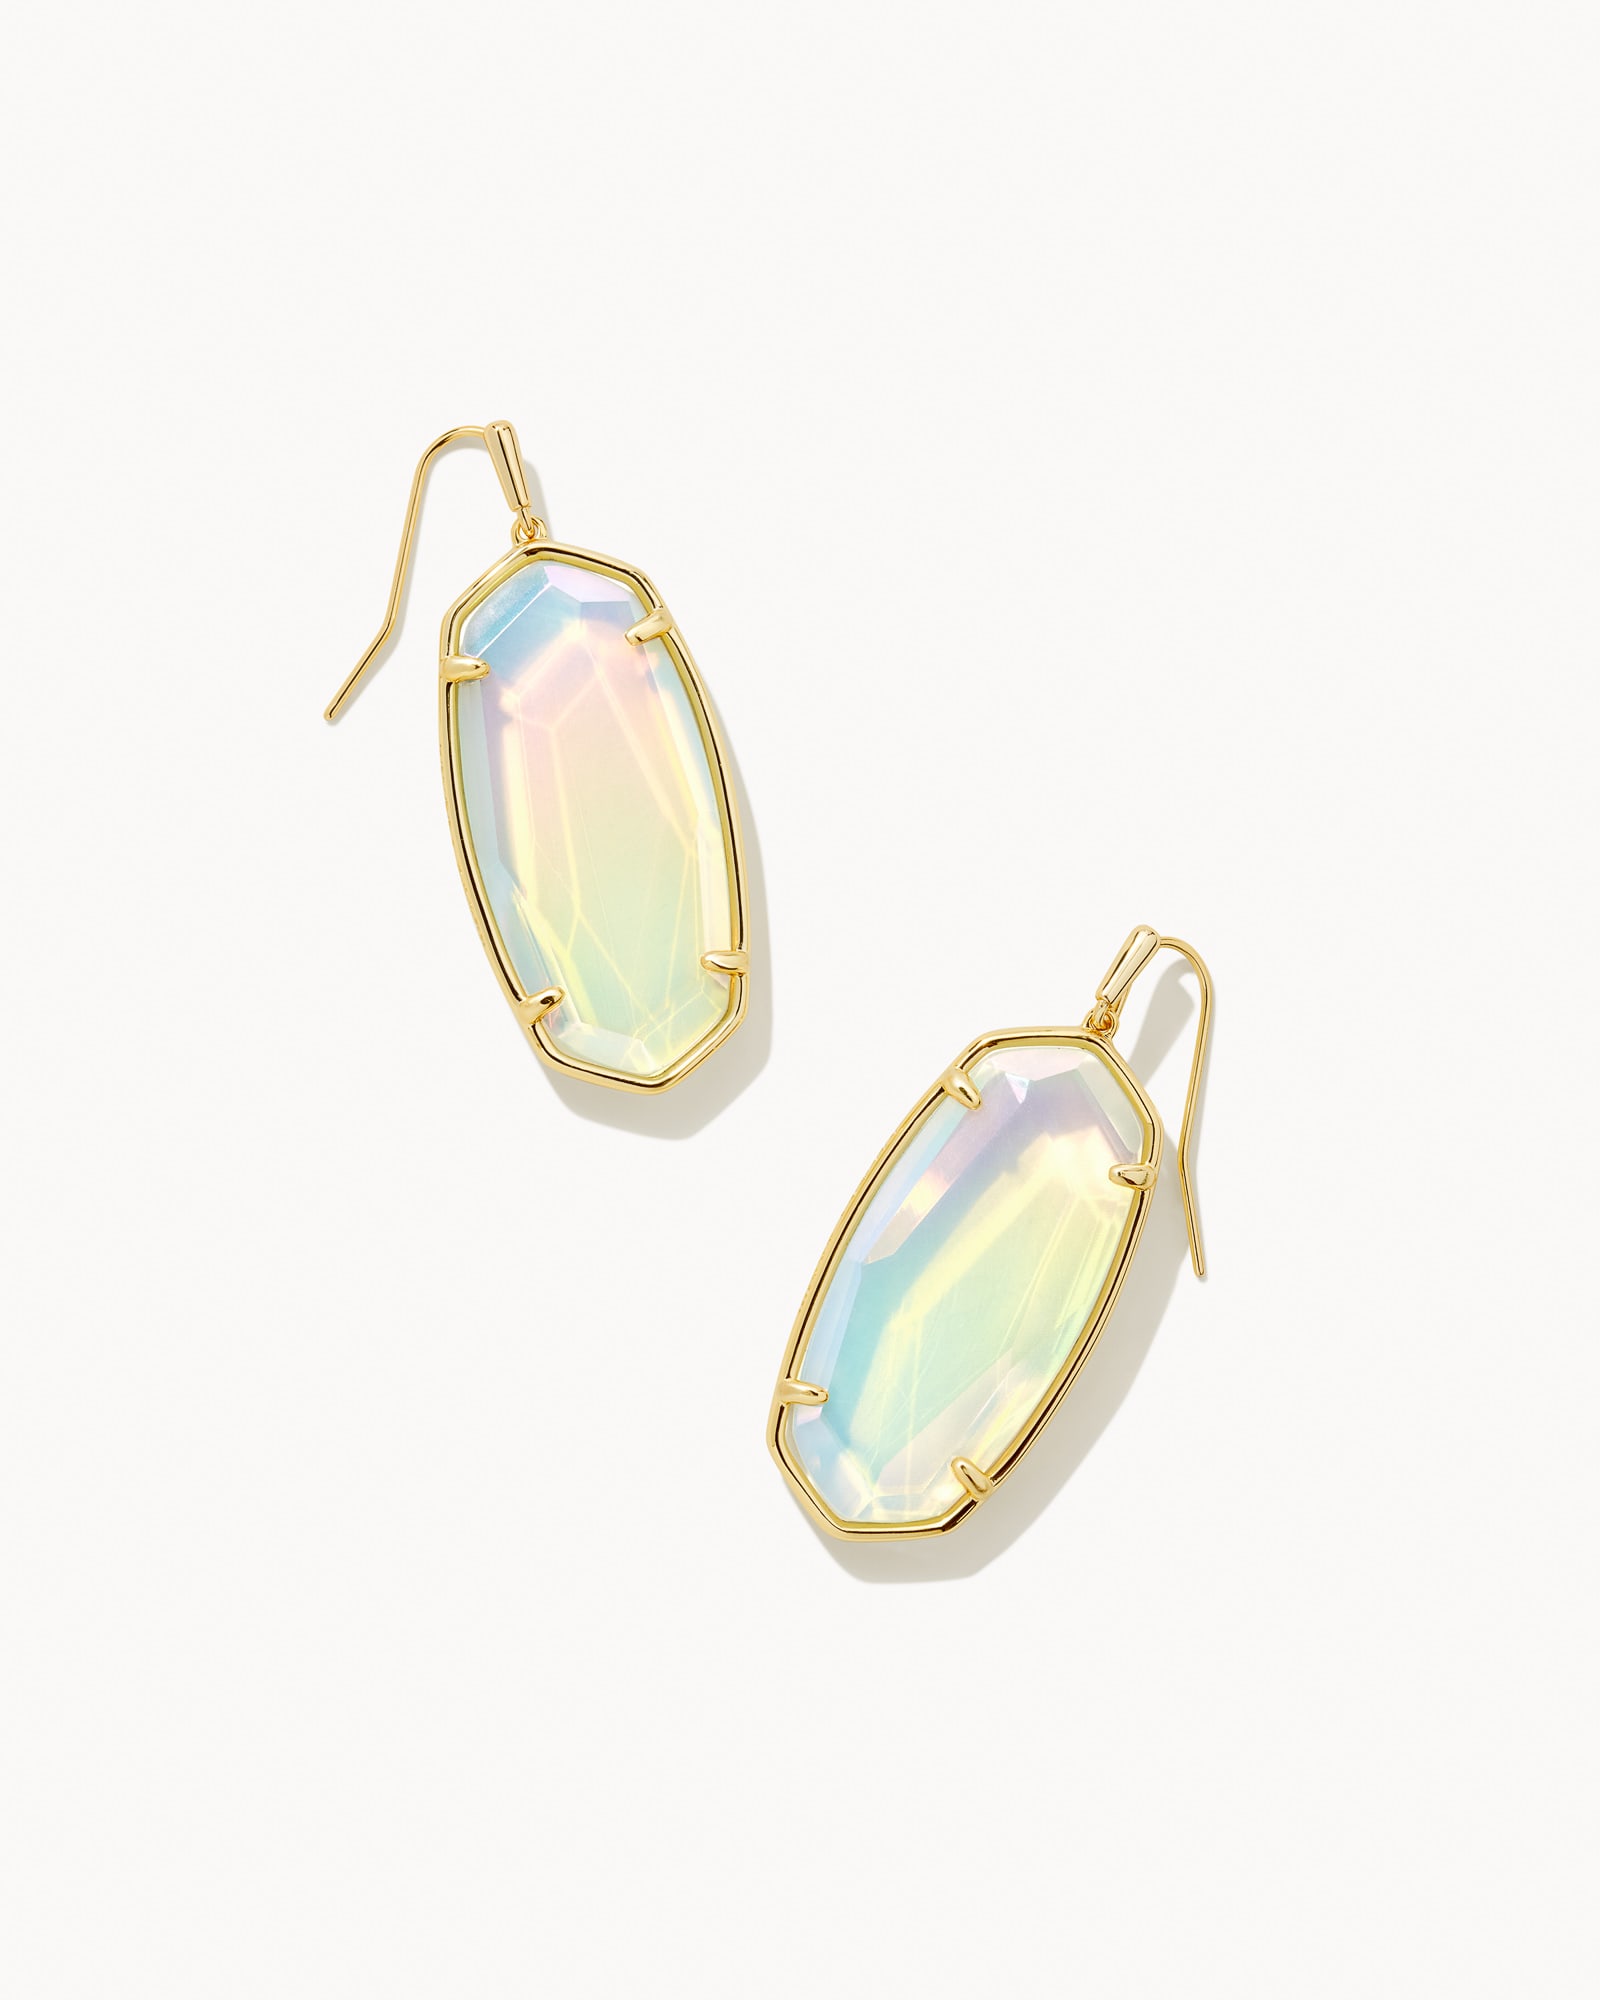 Photos - Earrings KENDRA SCOTT Faceted Gold Elle Drop  in Iridescent Opalite Illusio 